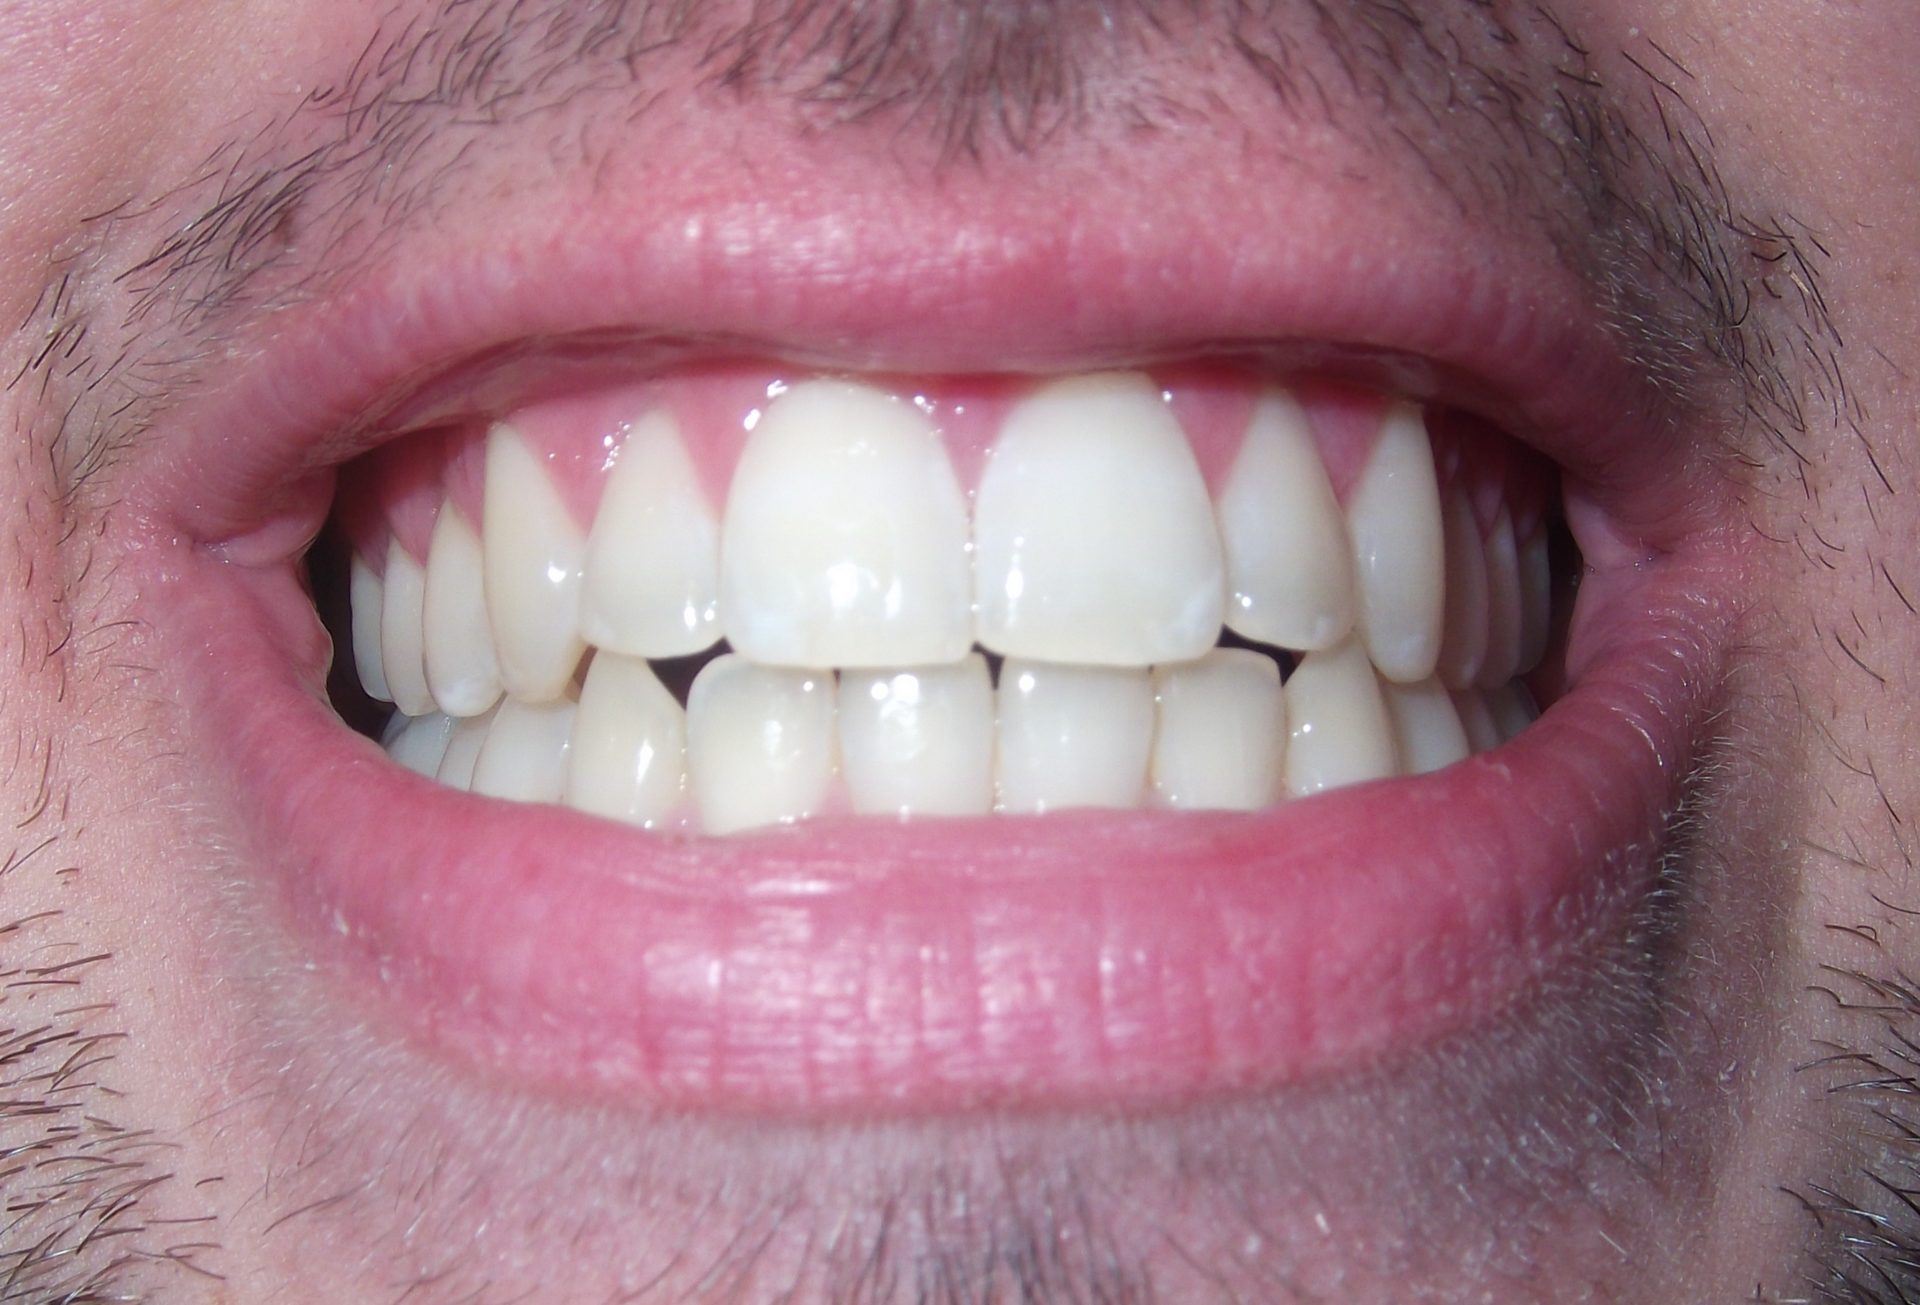 Do You Need Daily Treatment to Repair Damaged Enamel?